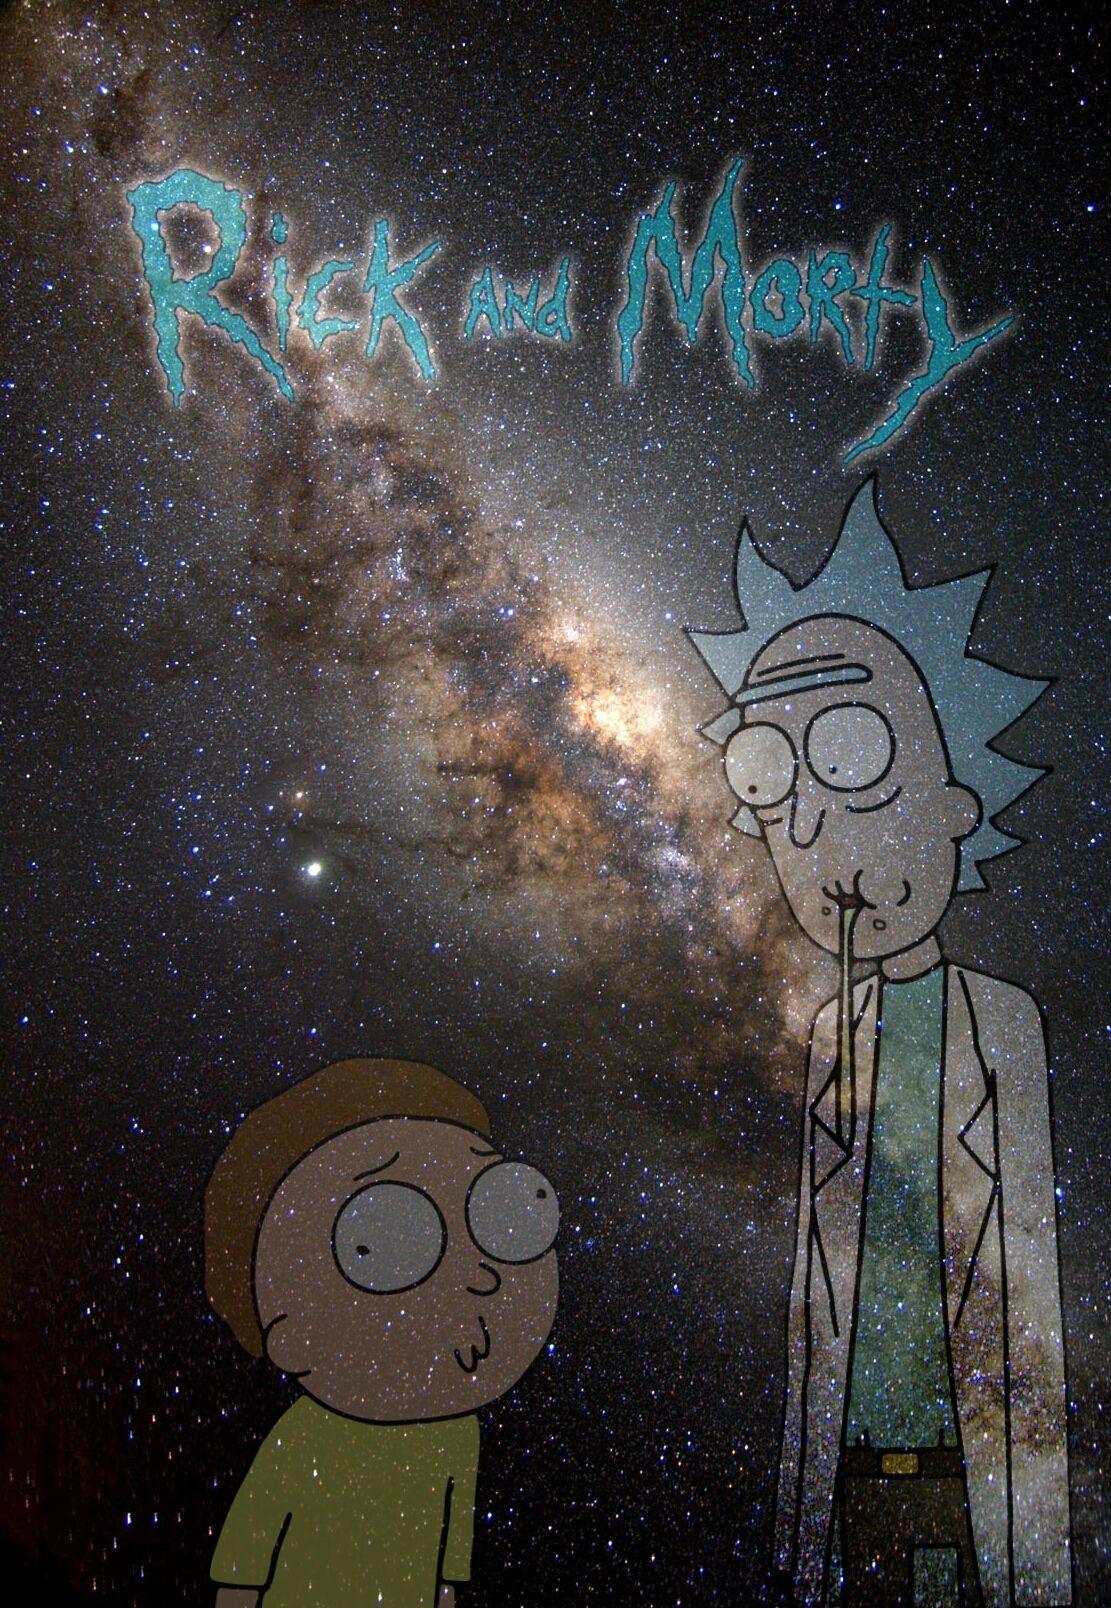 Rick and Morty wallpapers – Album on Imgur